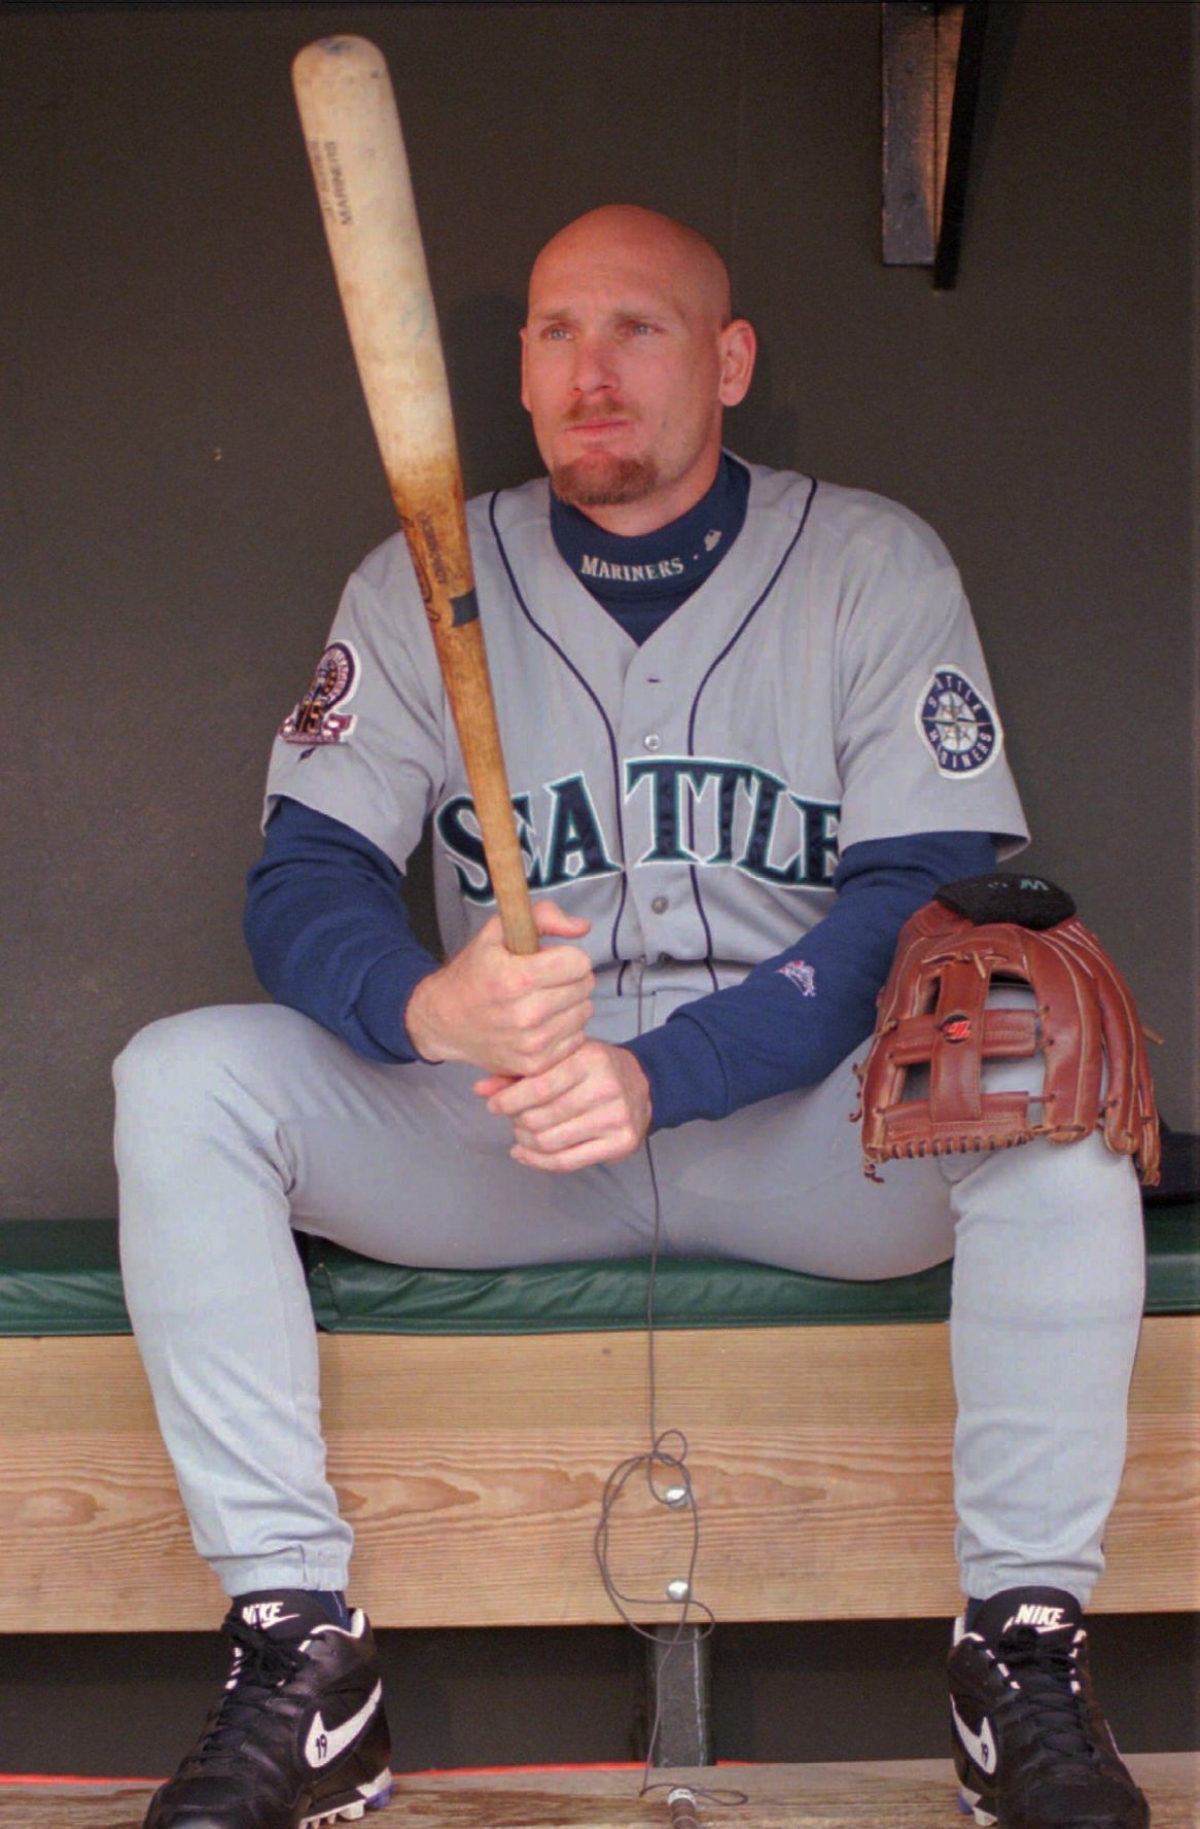 Not in Hall of Fame - 9. Jay Buhner